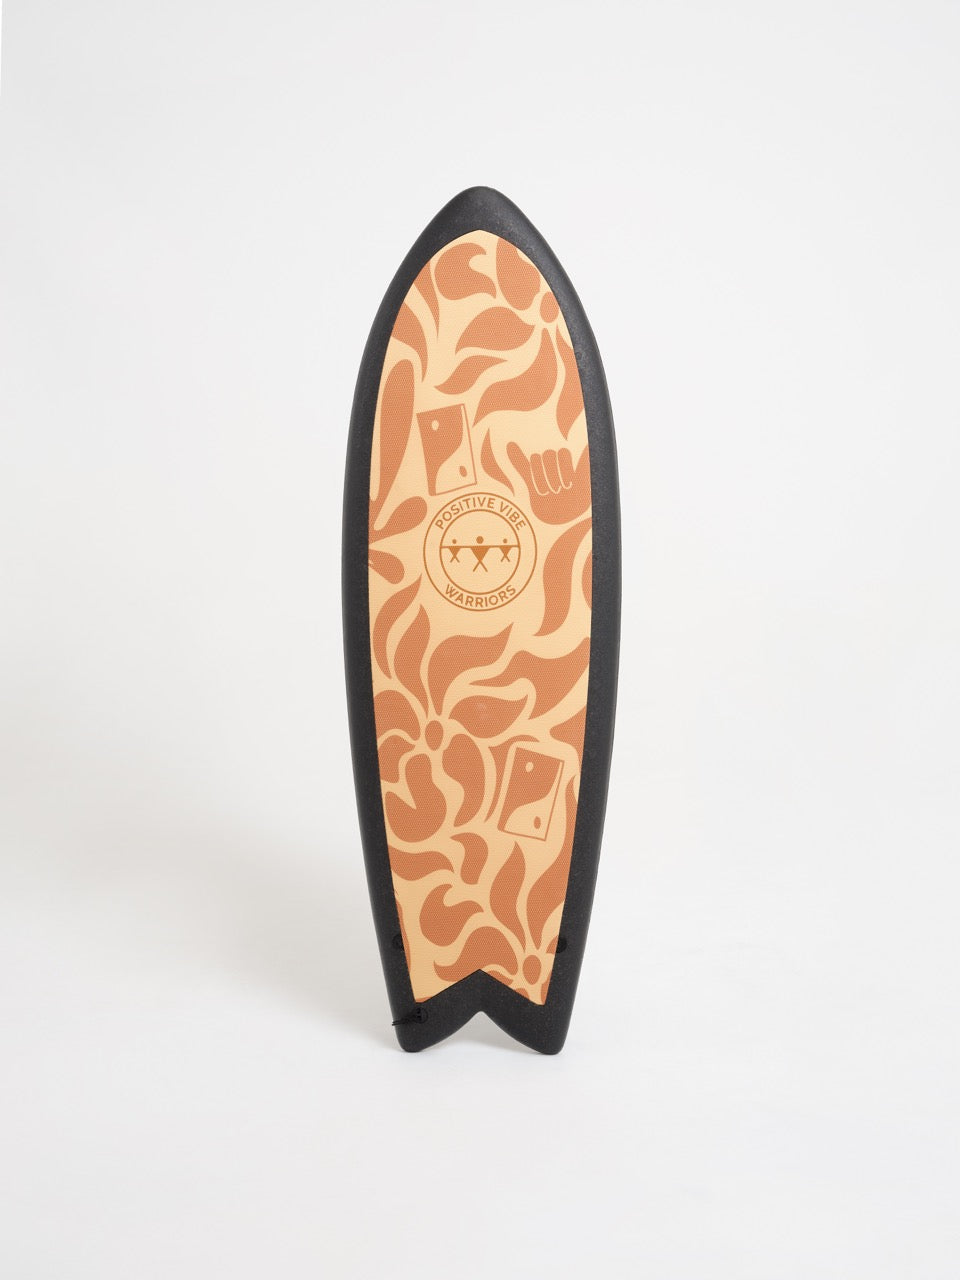 A black and beige 5 foot 3 inch Positive Vibe Warriors Thrill surfboard with a brown flower illustration on a white background